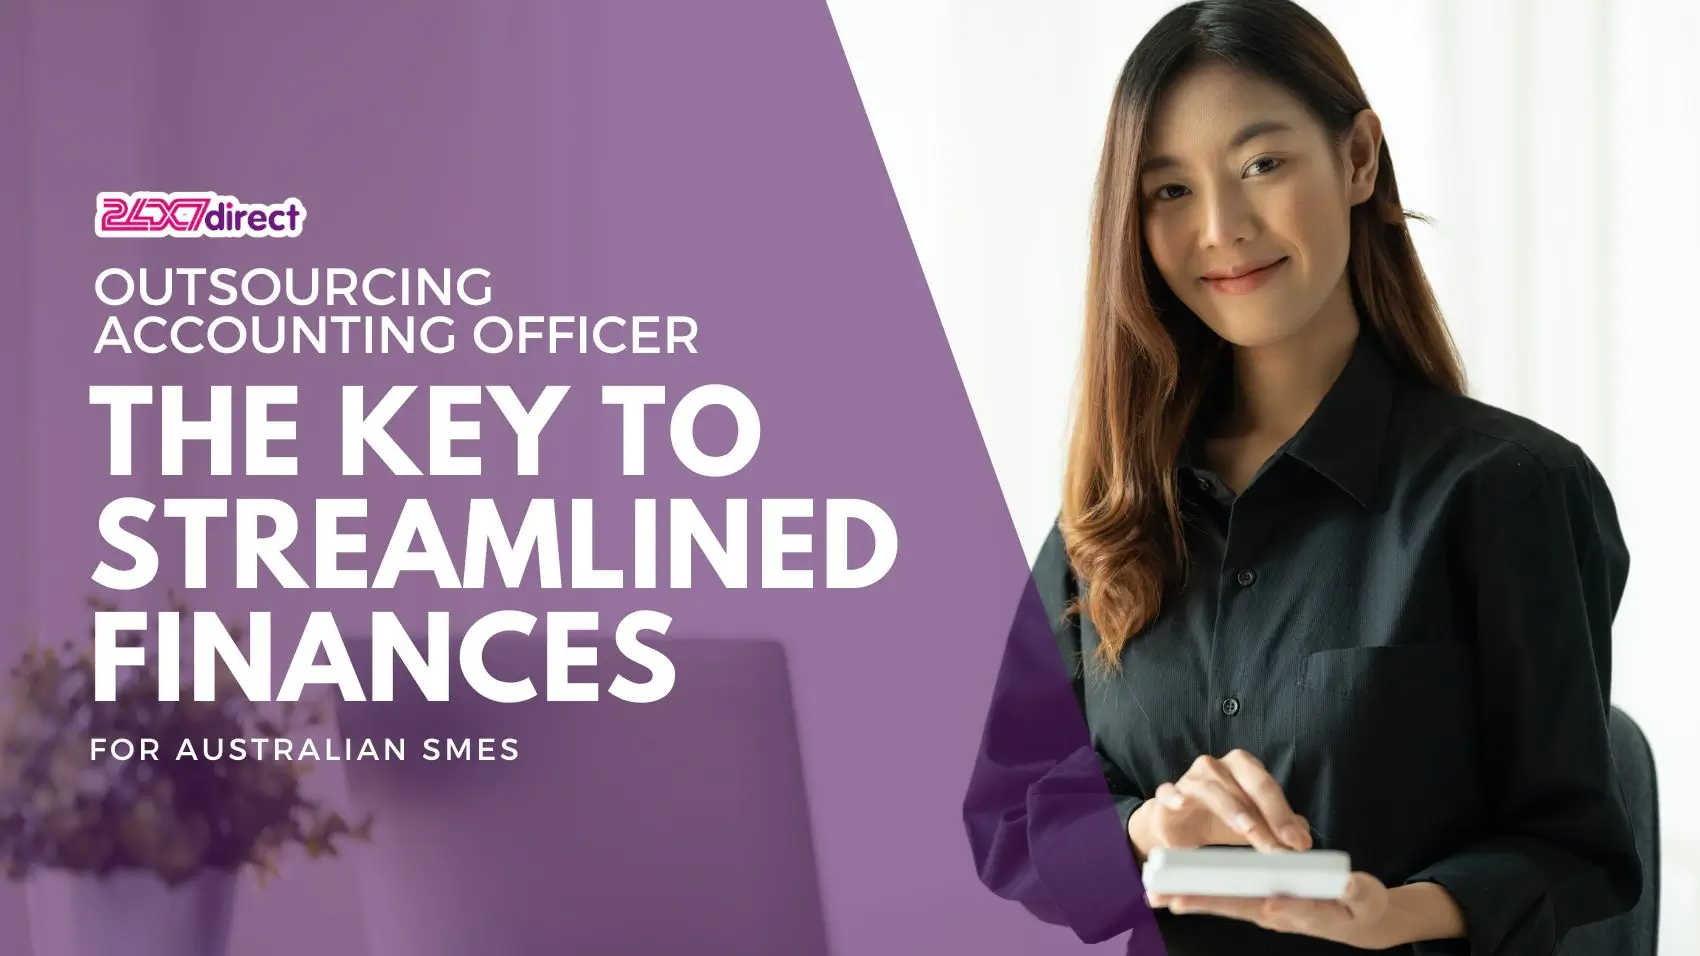 Outsourcing Accounting Officer: The Key to Streamlined Finances for Australian SMEs